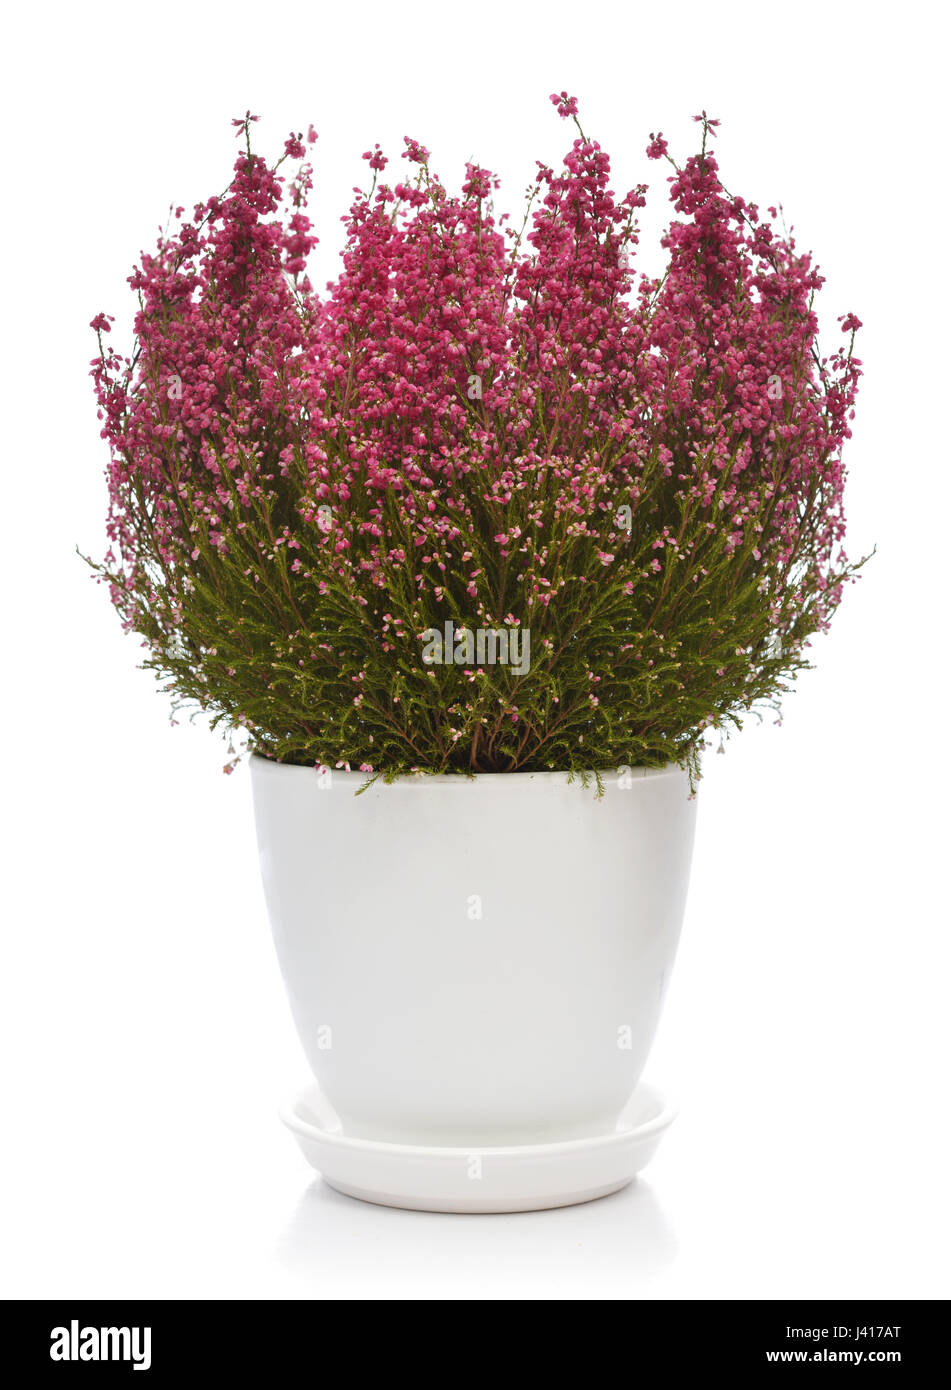 Calluna vulgaris (known as common heather, ling, or simply heather) in flower pot isolated on white background Stock Photo